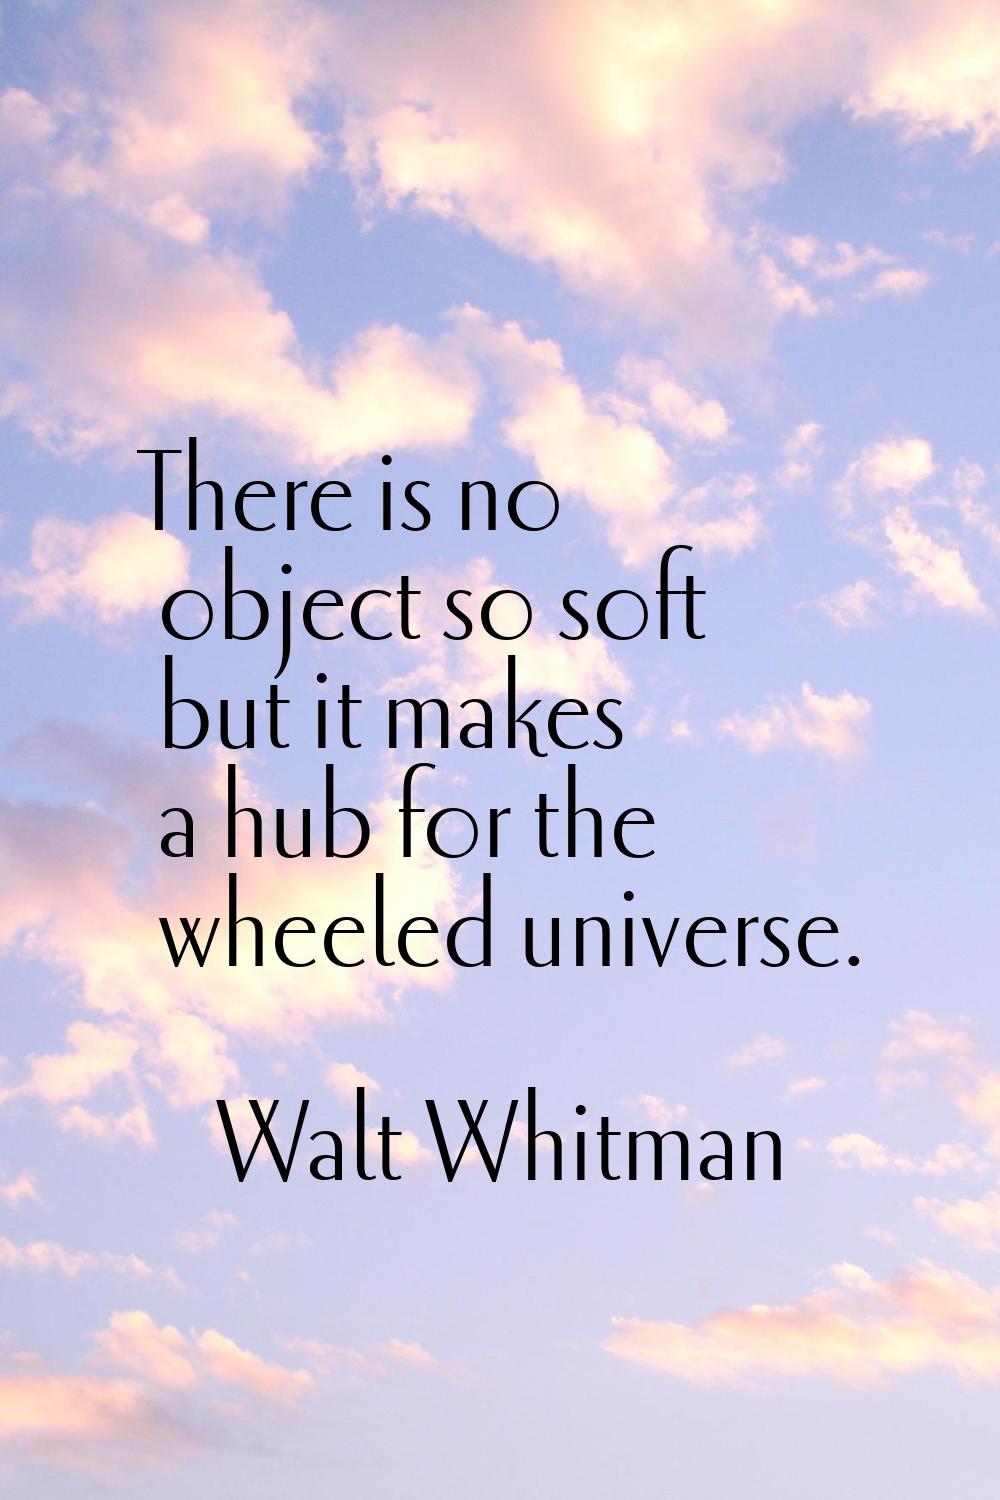 There is no object so soft but it makes a hub for the wheeled universe.